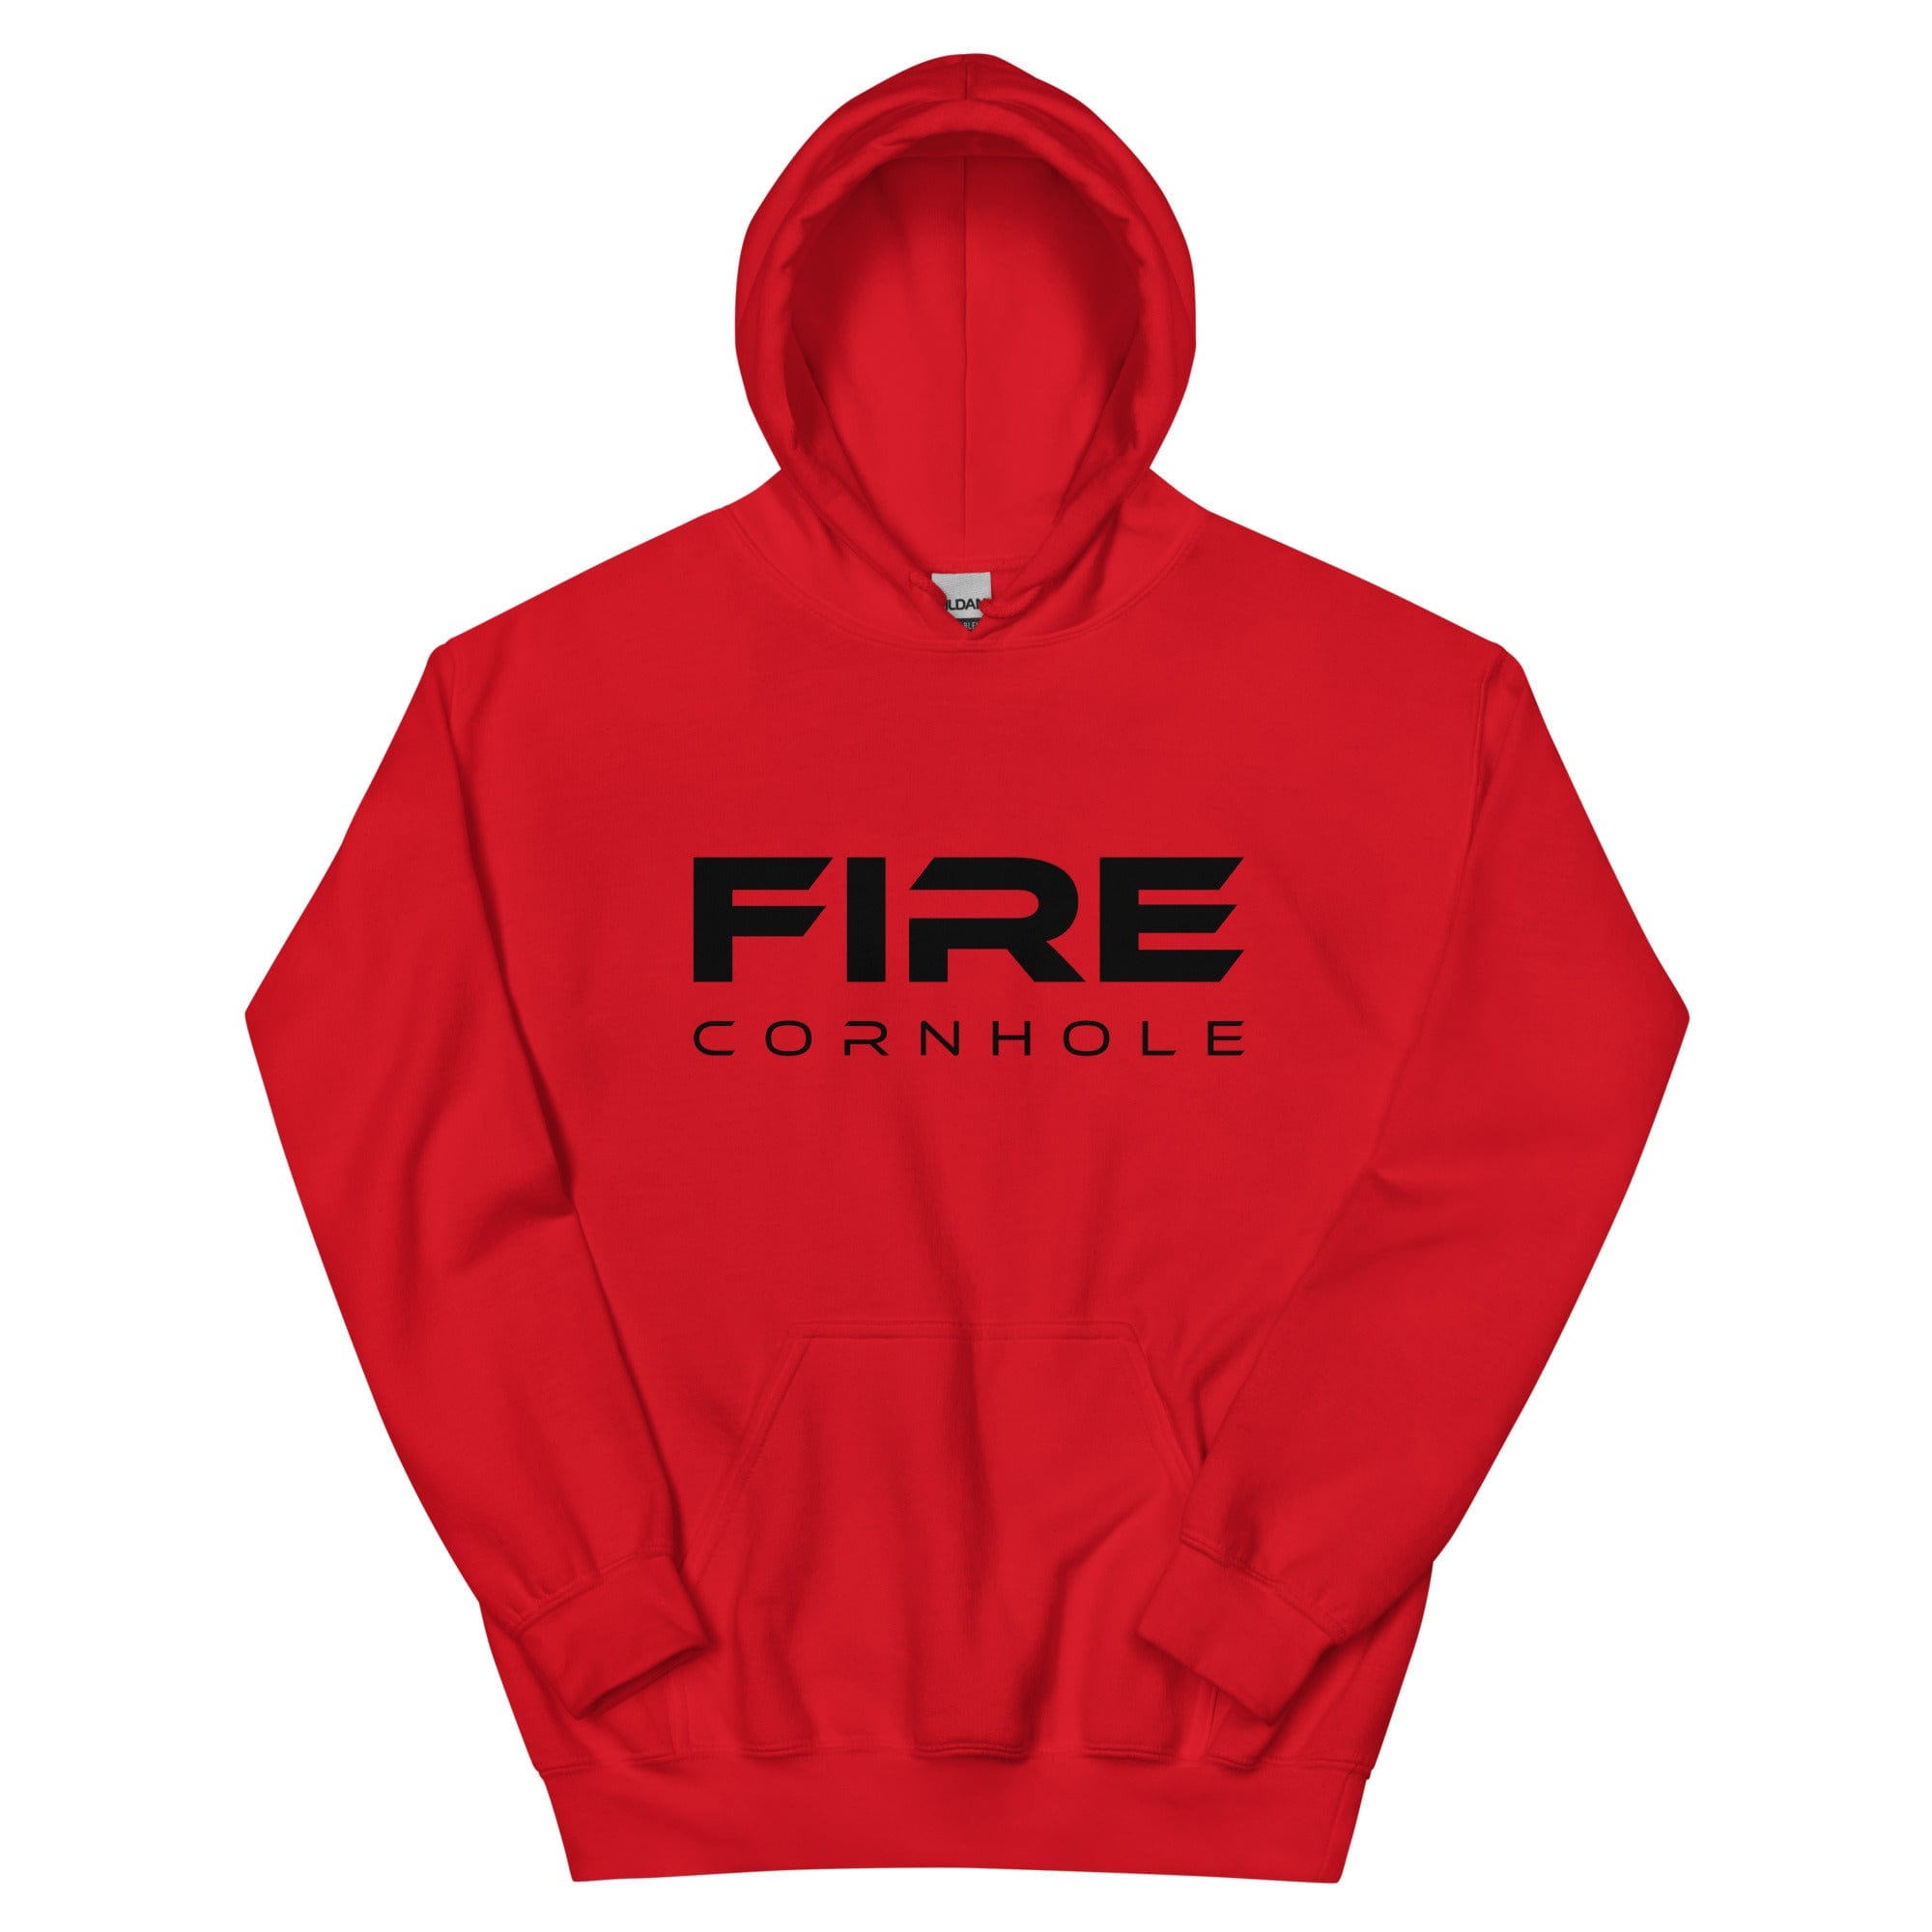 Red unisex cotton hoodie with Fire Cornhole logo in black